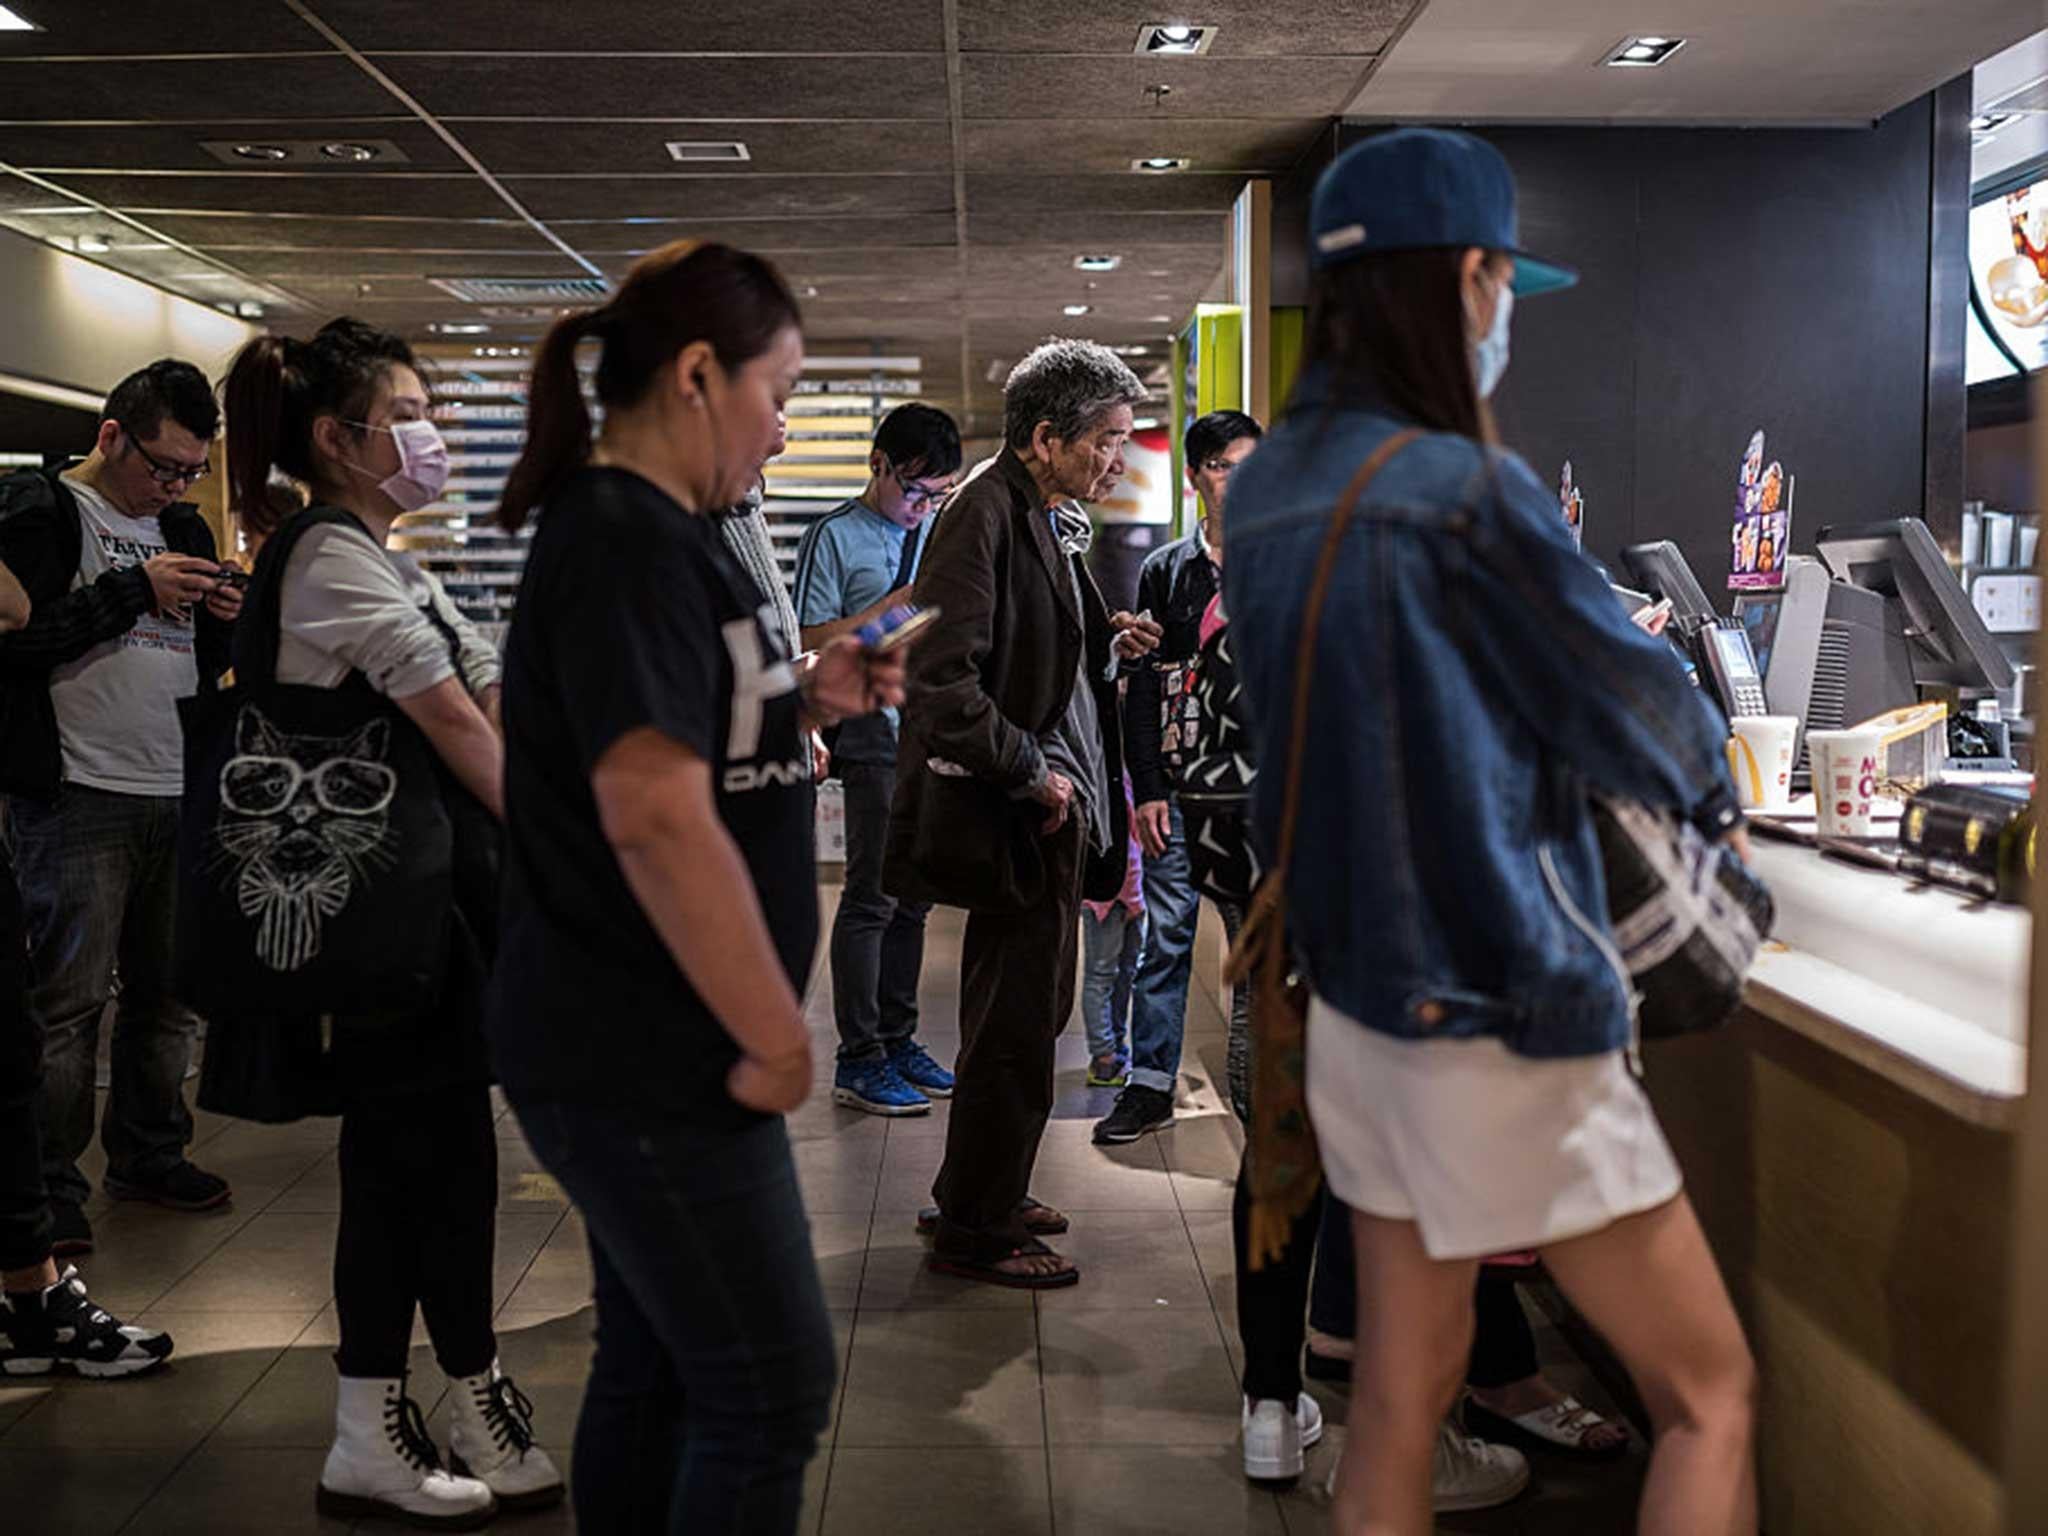 Queues at a McDonald’s outlet in the Kowloon district of Hong Kong